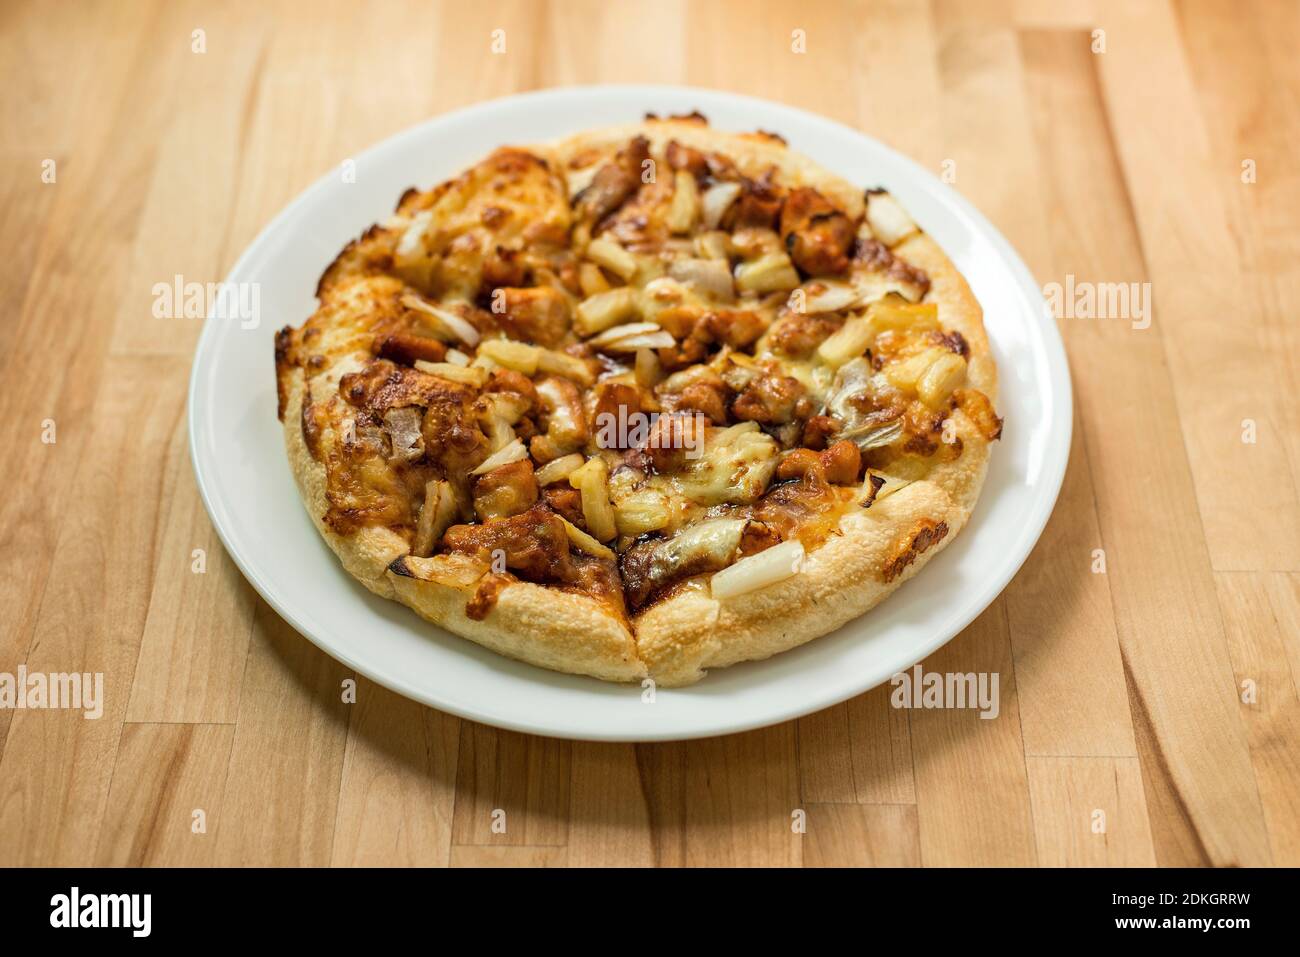 Close-up Of Pizza Served In Plate On Table Stock Photo